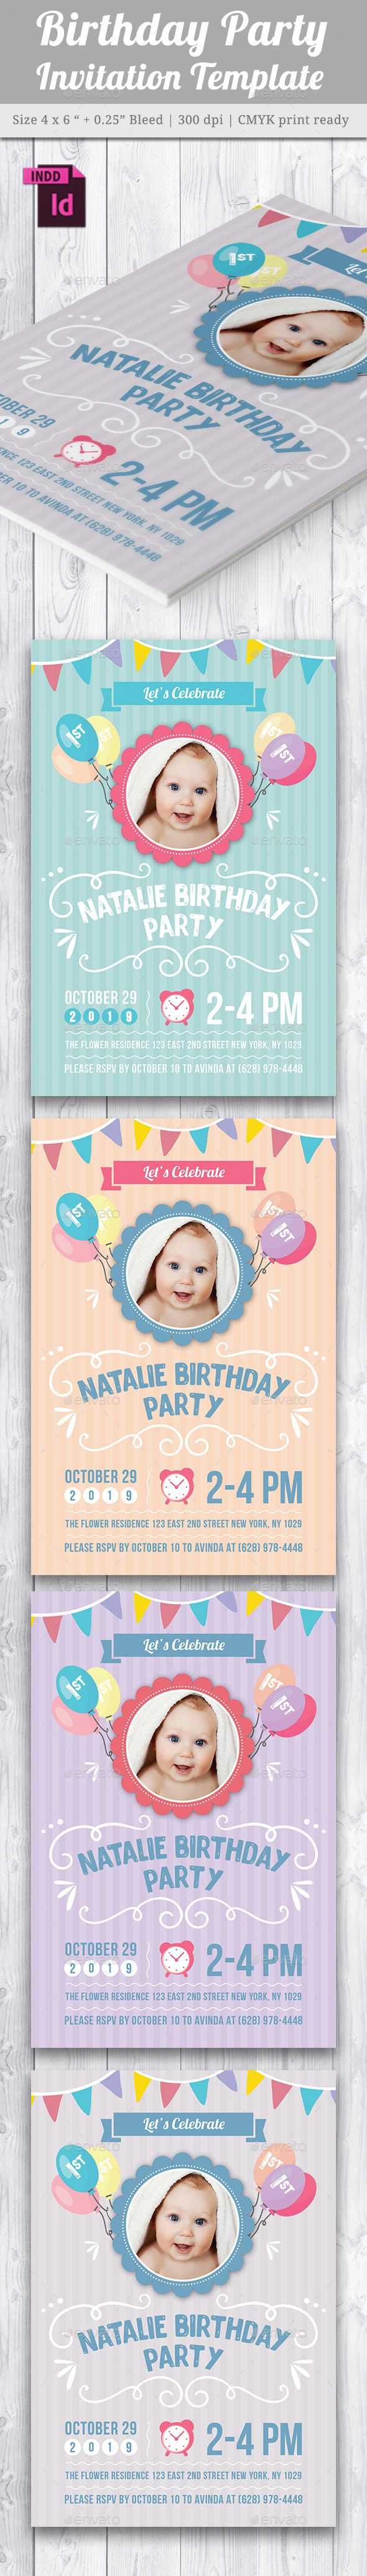 Baby Birthday Card Design Template Indesign Indd | Card Intended For Birthday Card Template Indesign